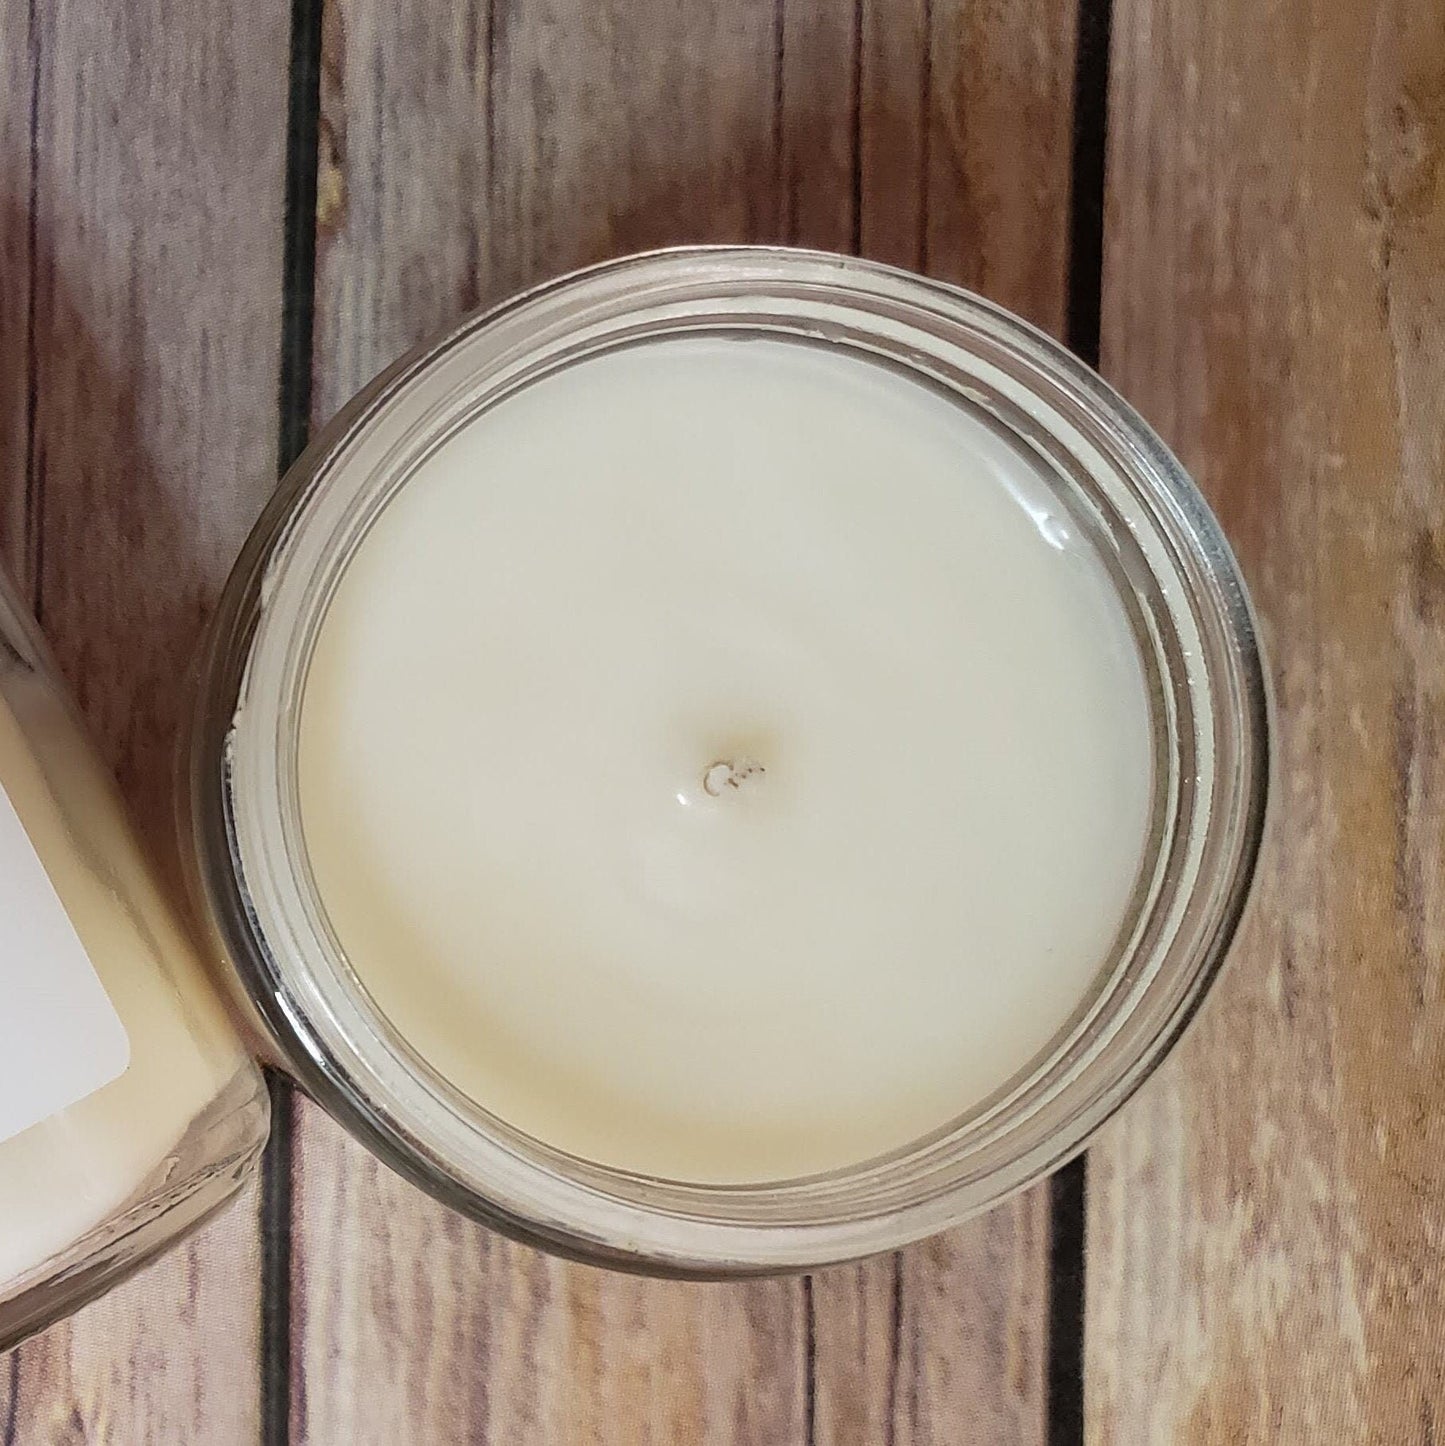 Ivy Creek No. 20 Egyptian Amber Soy Blend Candle | Hand-Poured | 7 oz | Cotton Wick | Small Batch | Clean Burning | Container Candle